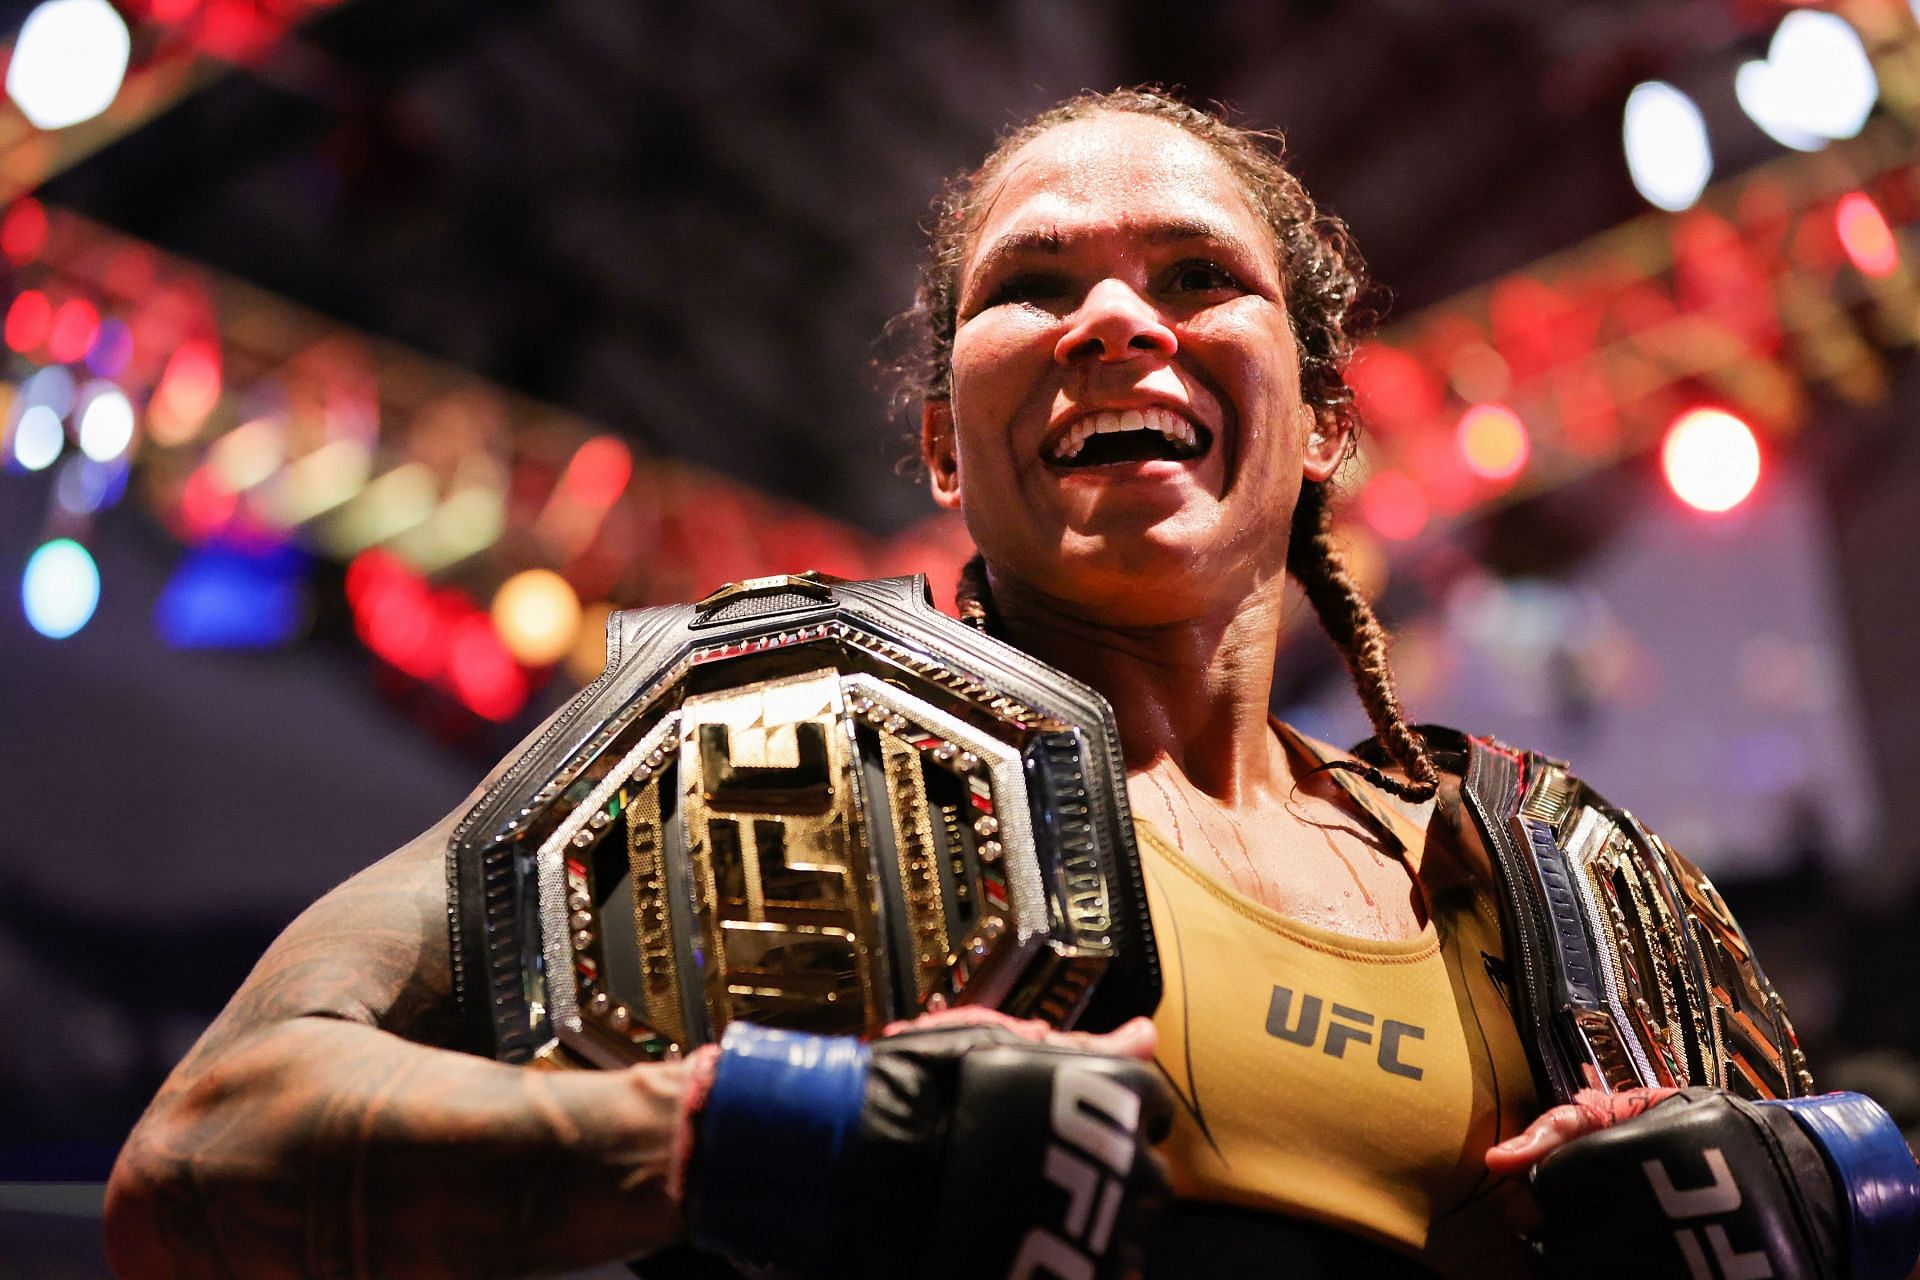 Amanda Nunes erased the memory of her upset loss to Julianna Pena by beating her in a rematch